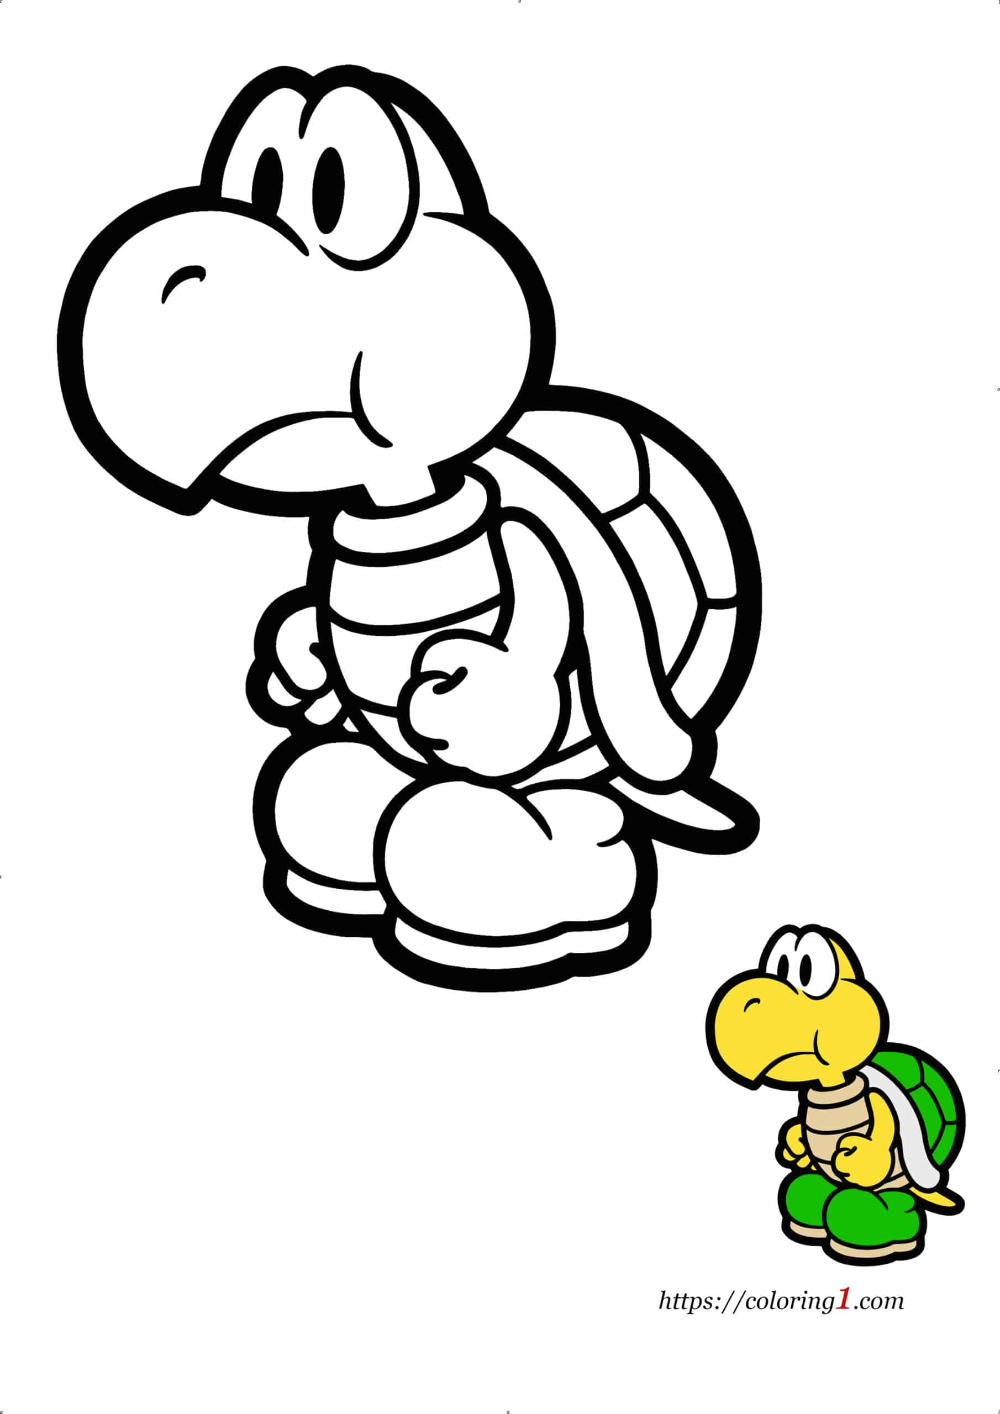 Mario Koopa Troopa Coloring Pages - 2 Free Coloring Sheets (2021) | Mario coloring  pages, Super mario coloring pages, Coloring pages